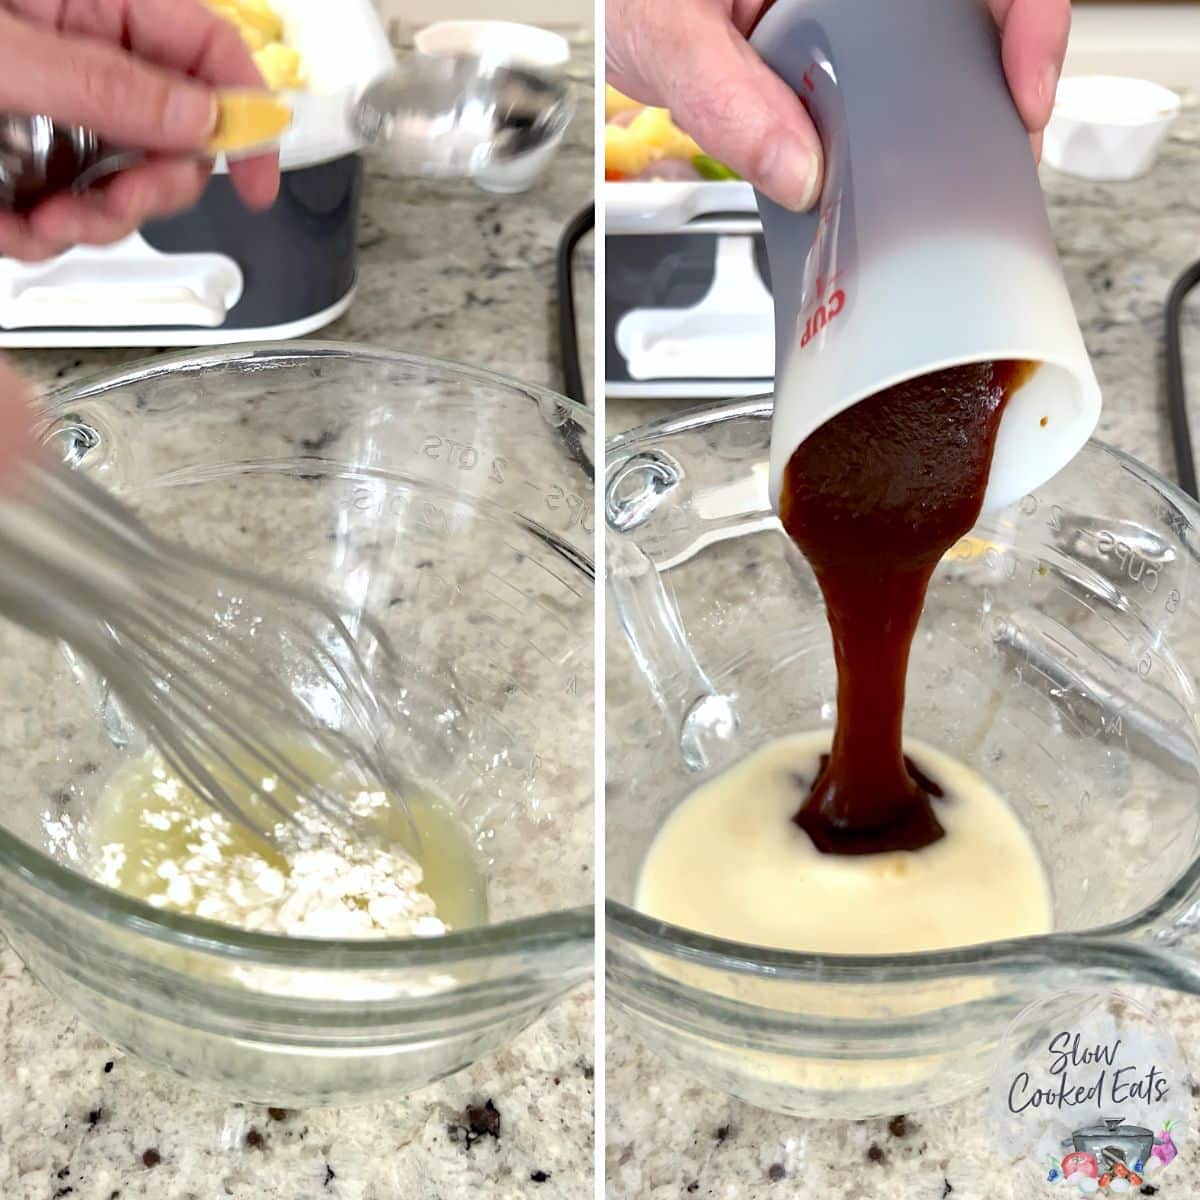 Mixing the sweet Hawaiian sauce ingredients together in a clear glass bowl.